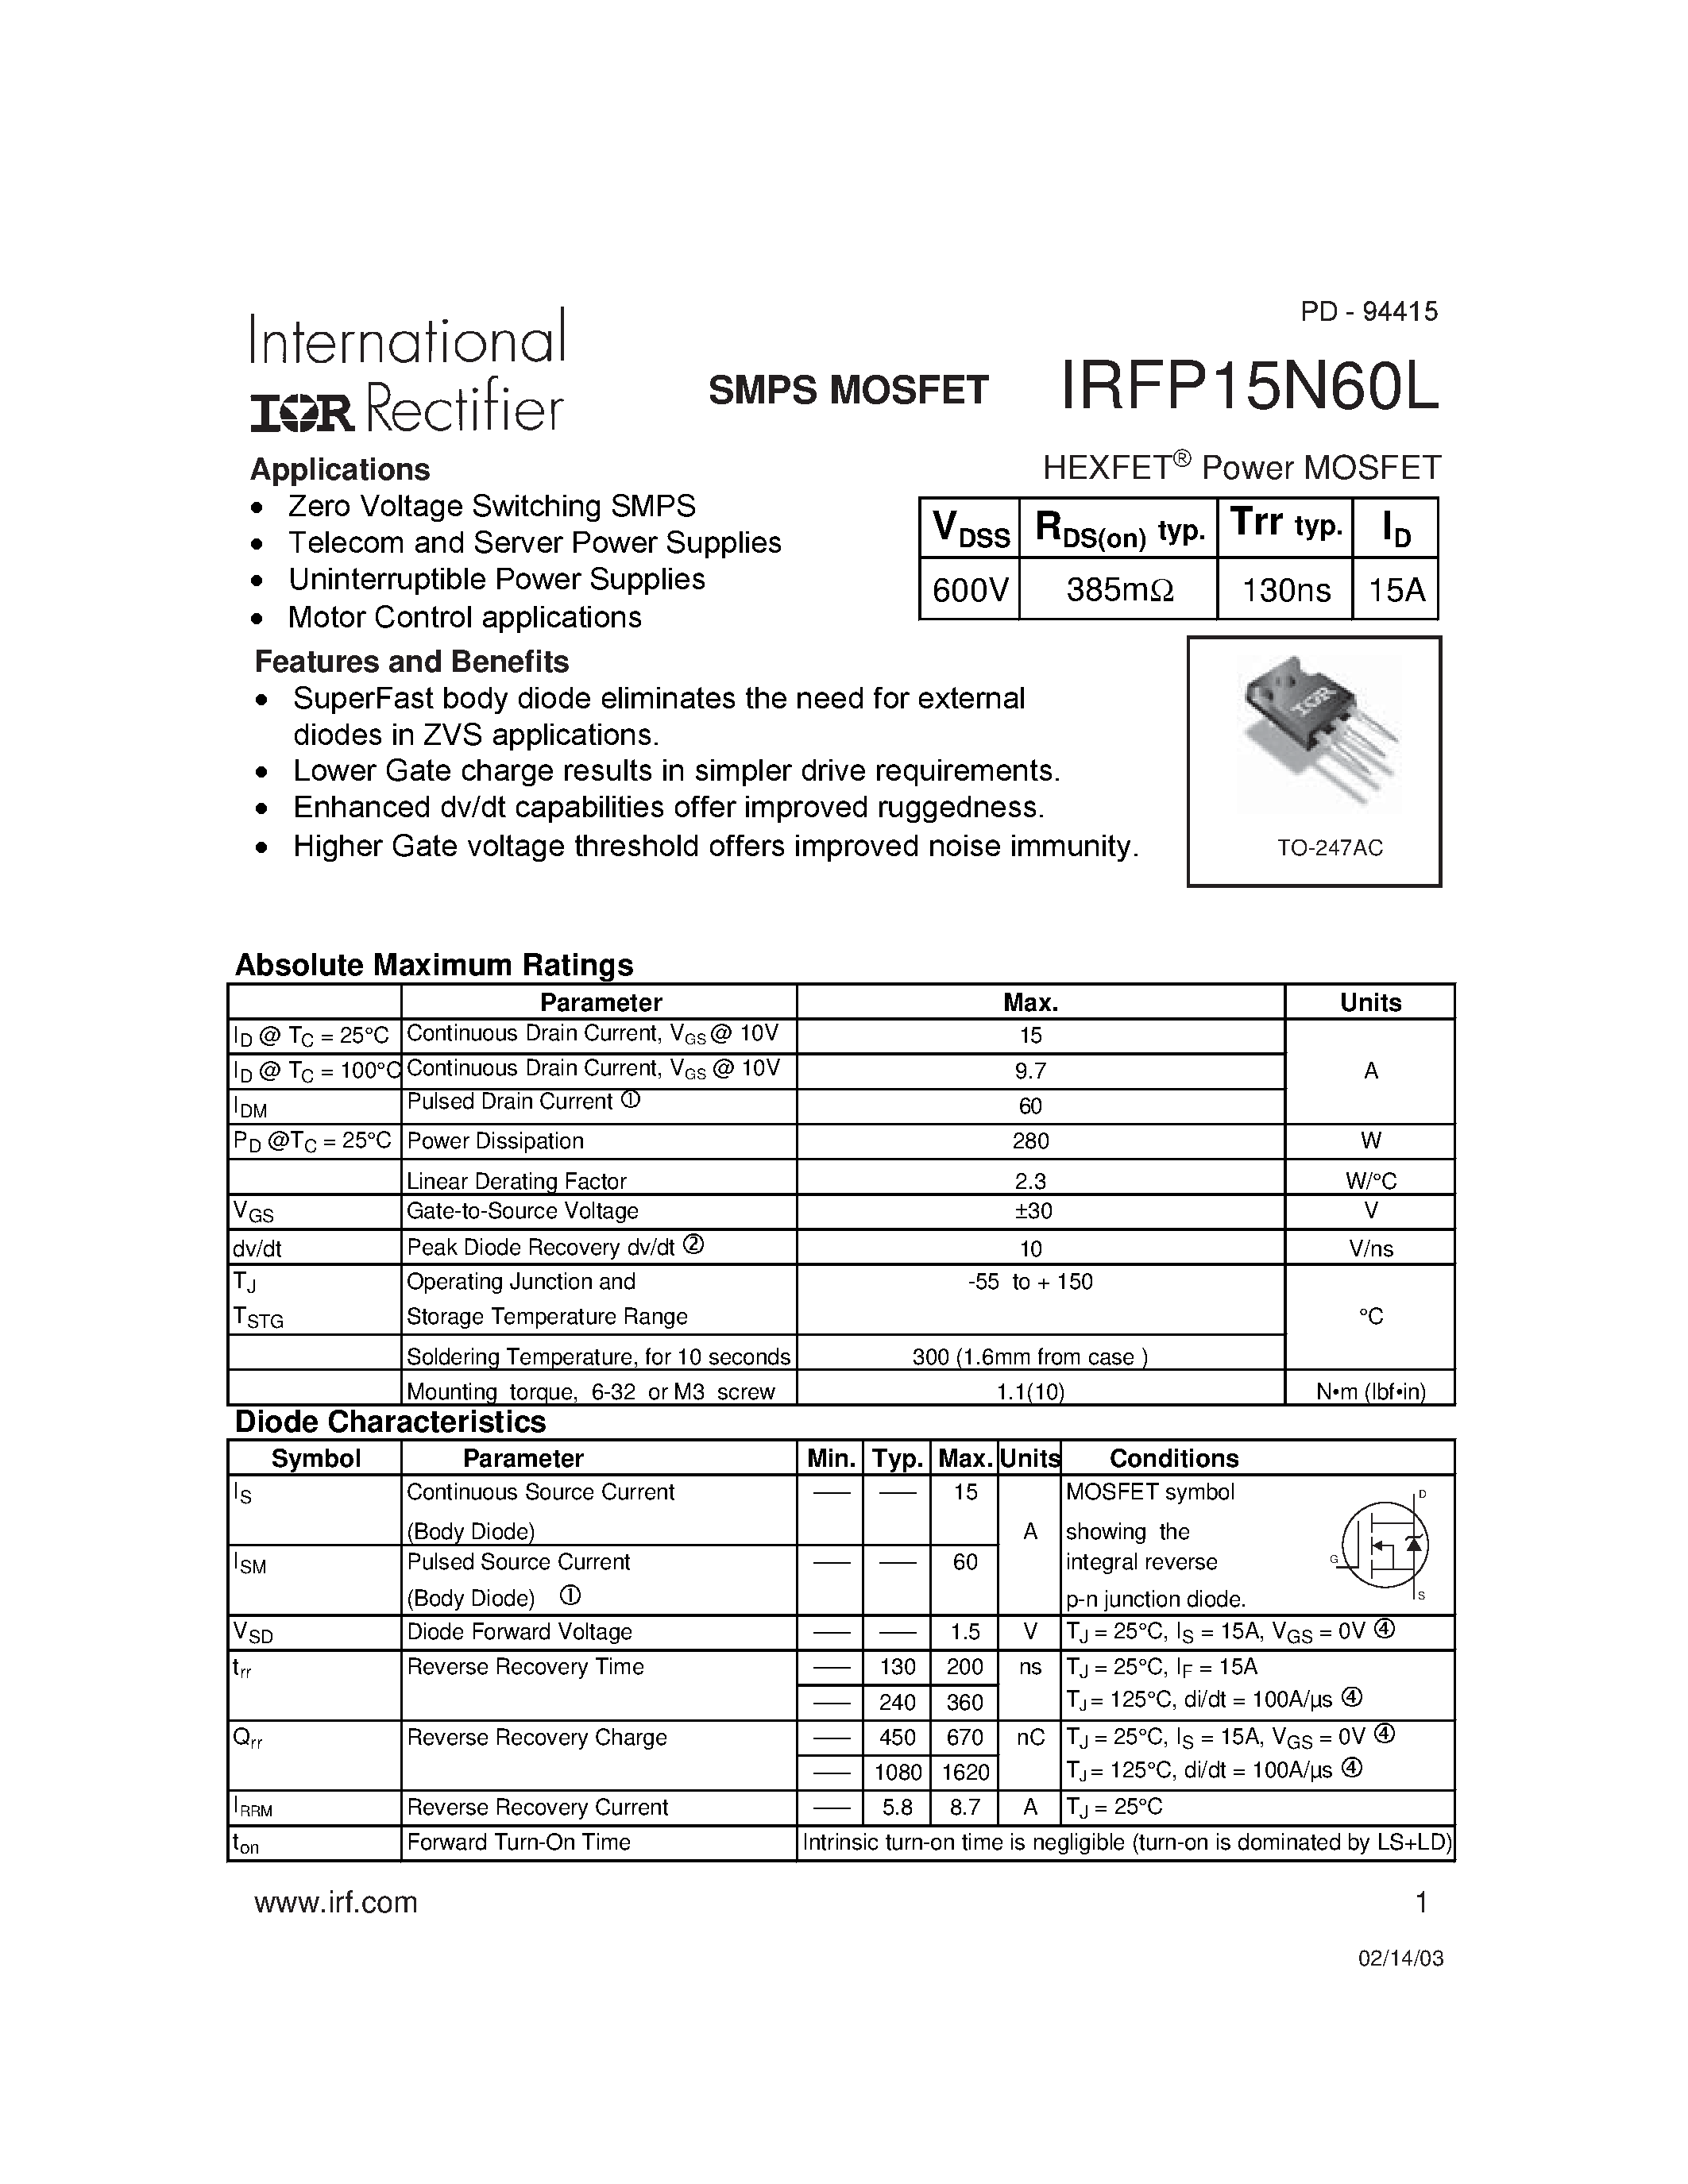 Даташит IRFP15N60L - HEXFET Power MOSFET страница 1